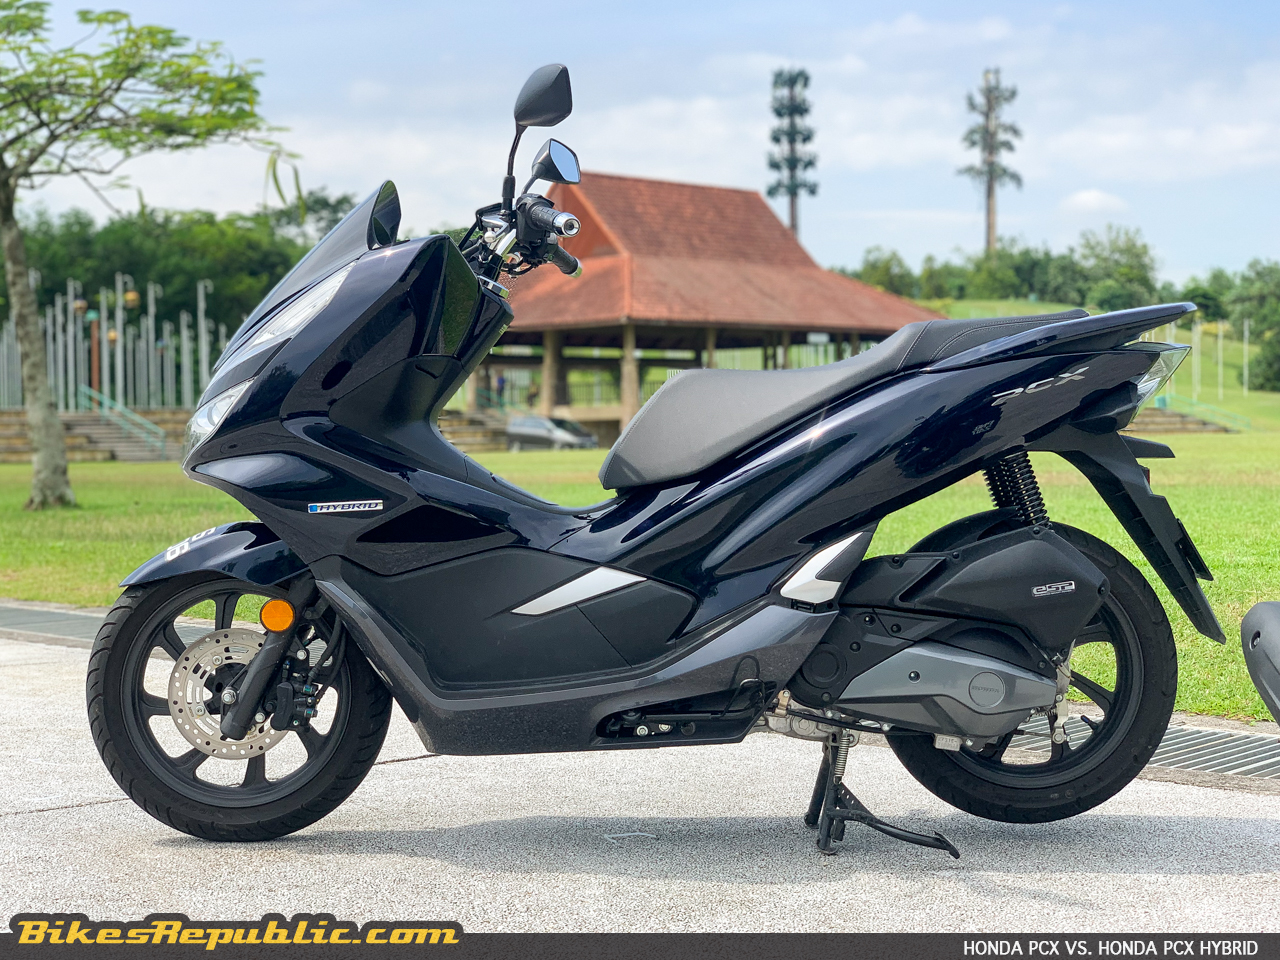 Honda PCX Hybrid & Review, “Economical Doesn't Mean Boring” - Motorcycle news, Motorcycle reviews from Malaysia, Asia and the world - BikesRepublic.com